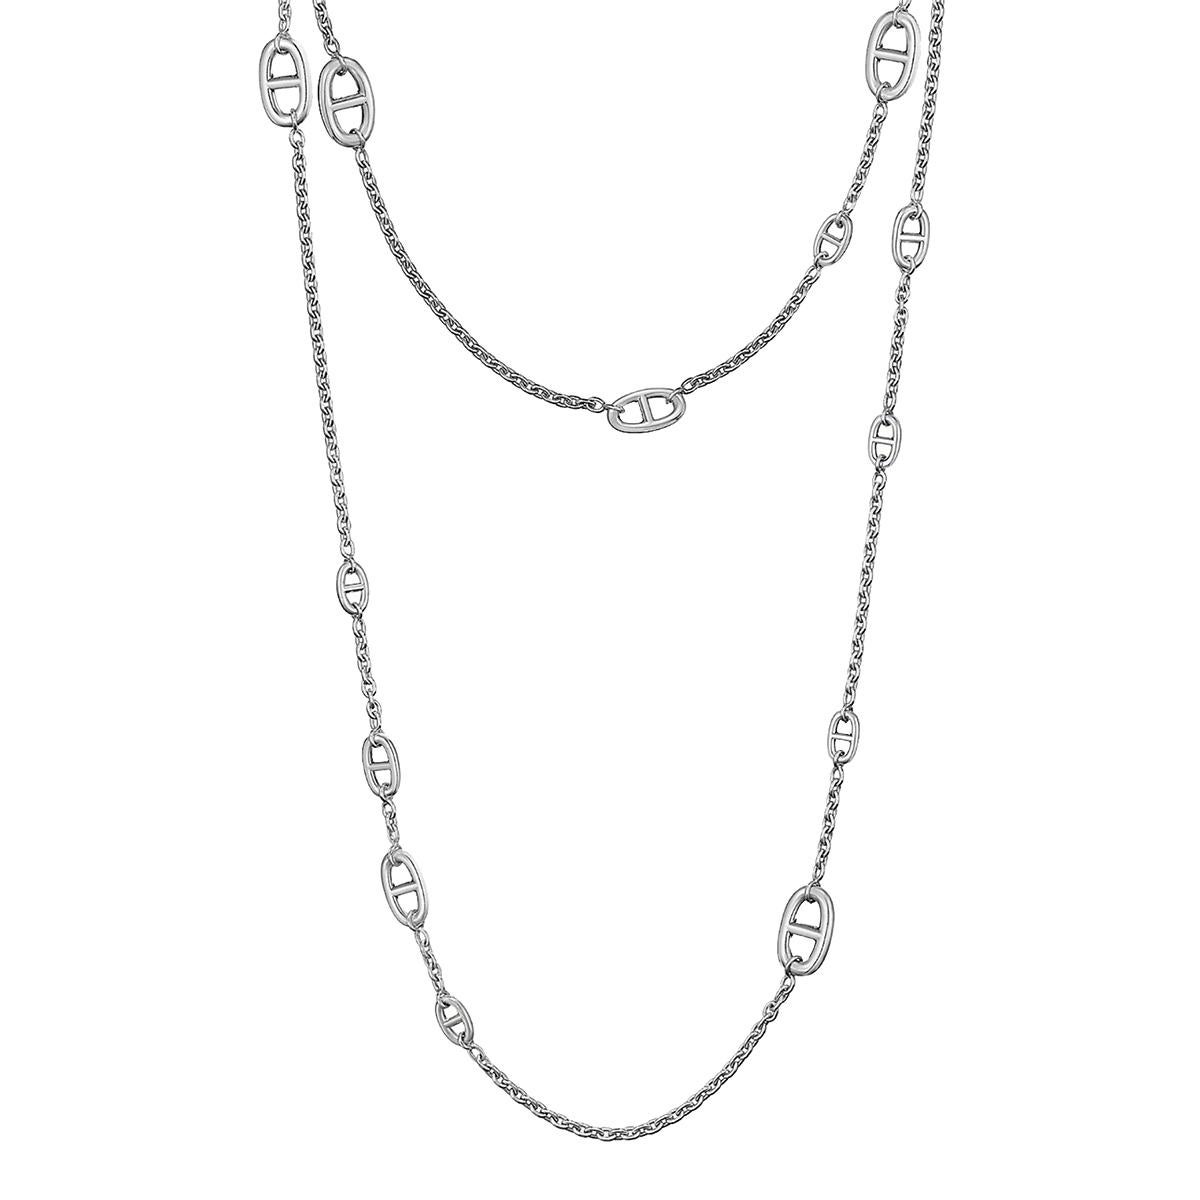 This Farandole necklace is from Hermes’ nautical-inspired ‘Chain d’Ancre collection'. The collection was specifically designed to reflect the elegance of a boat’s chain-link line to its anchor. Structured as a double-layered necklace, this silver